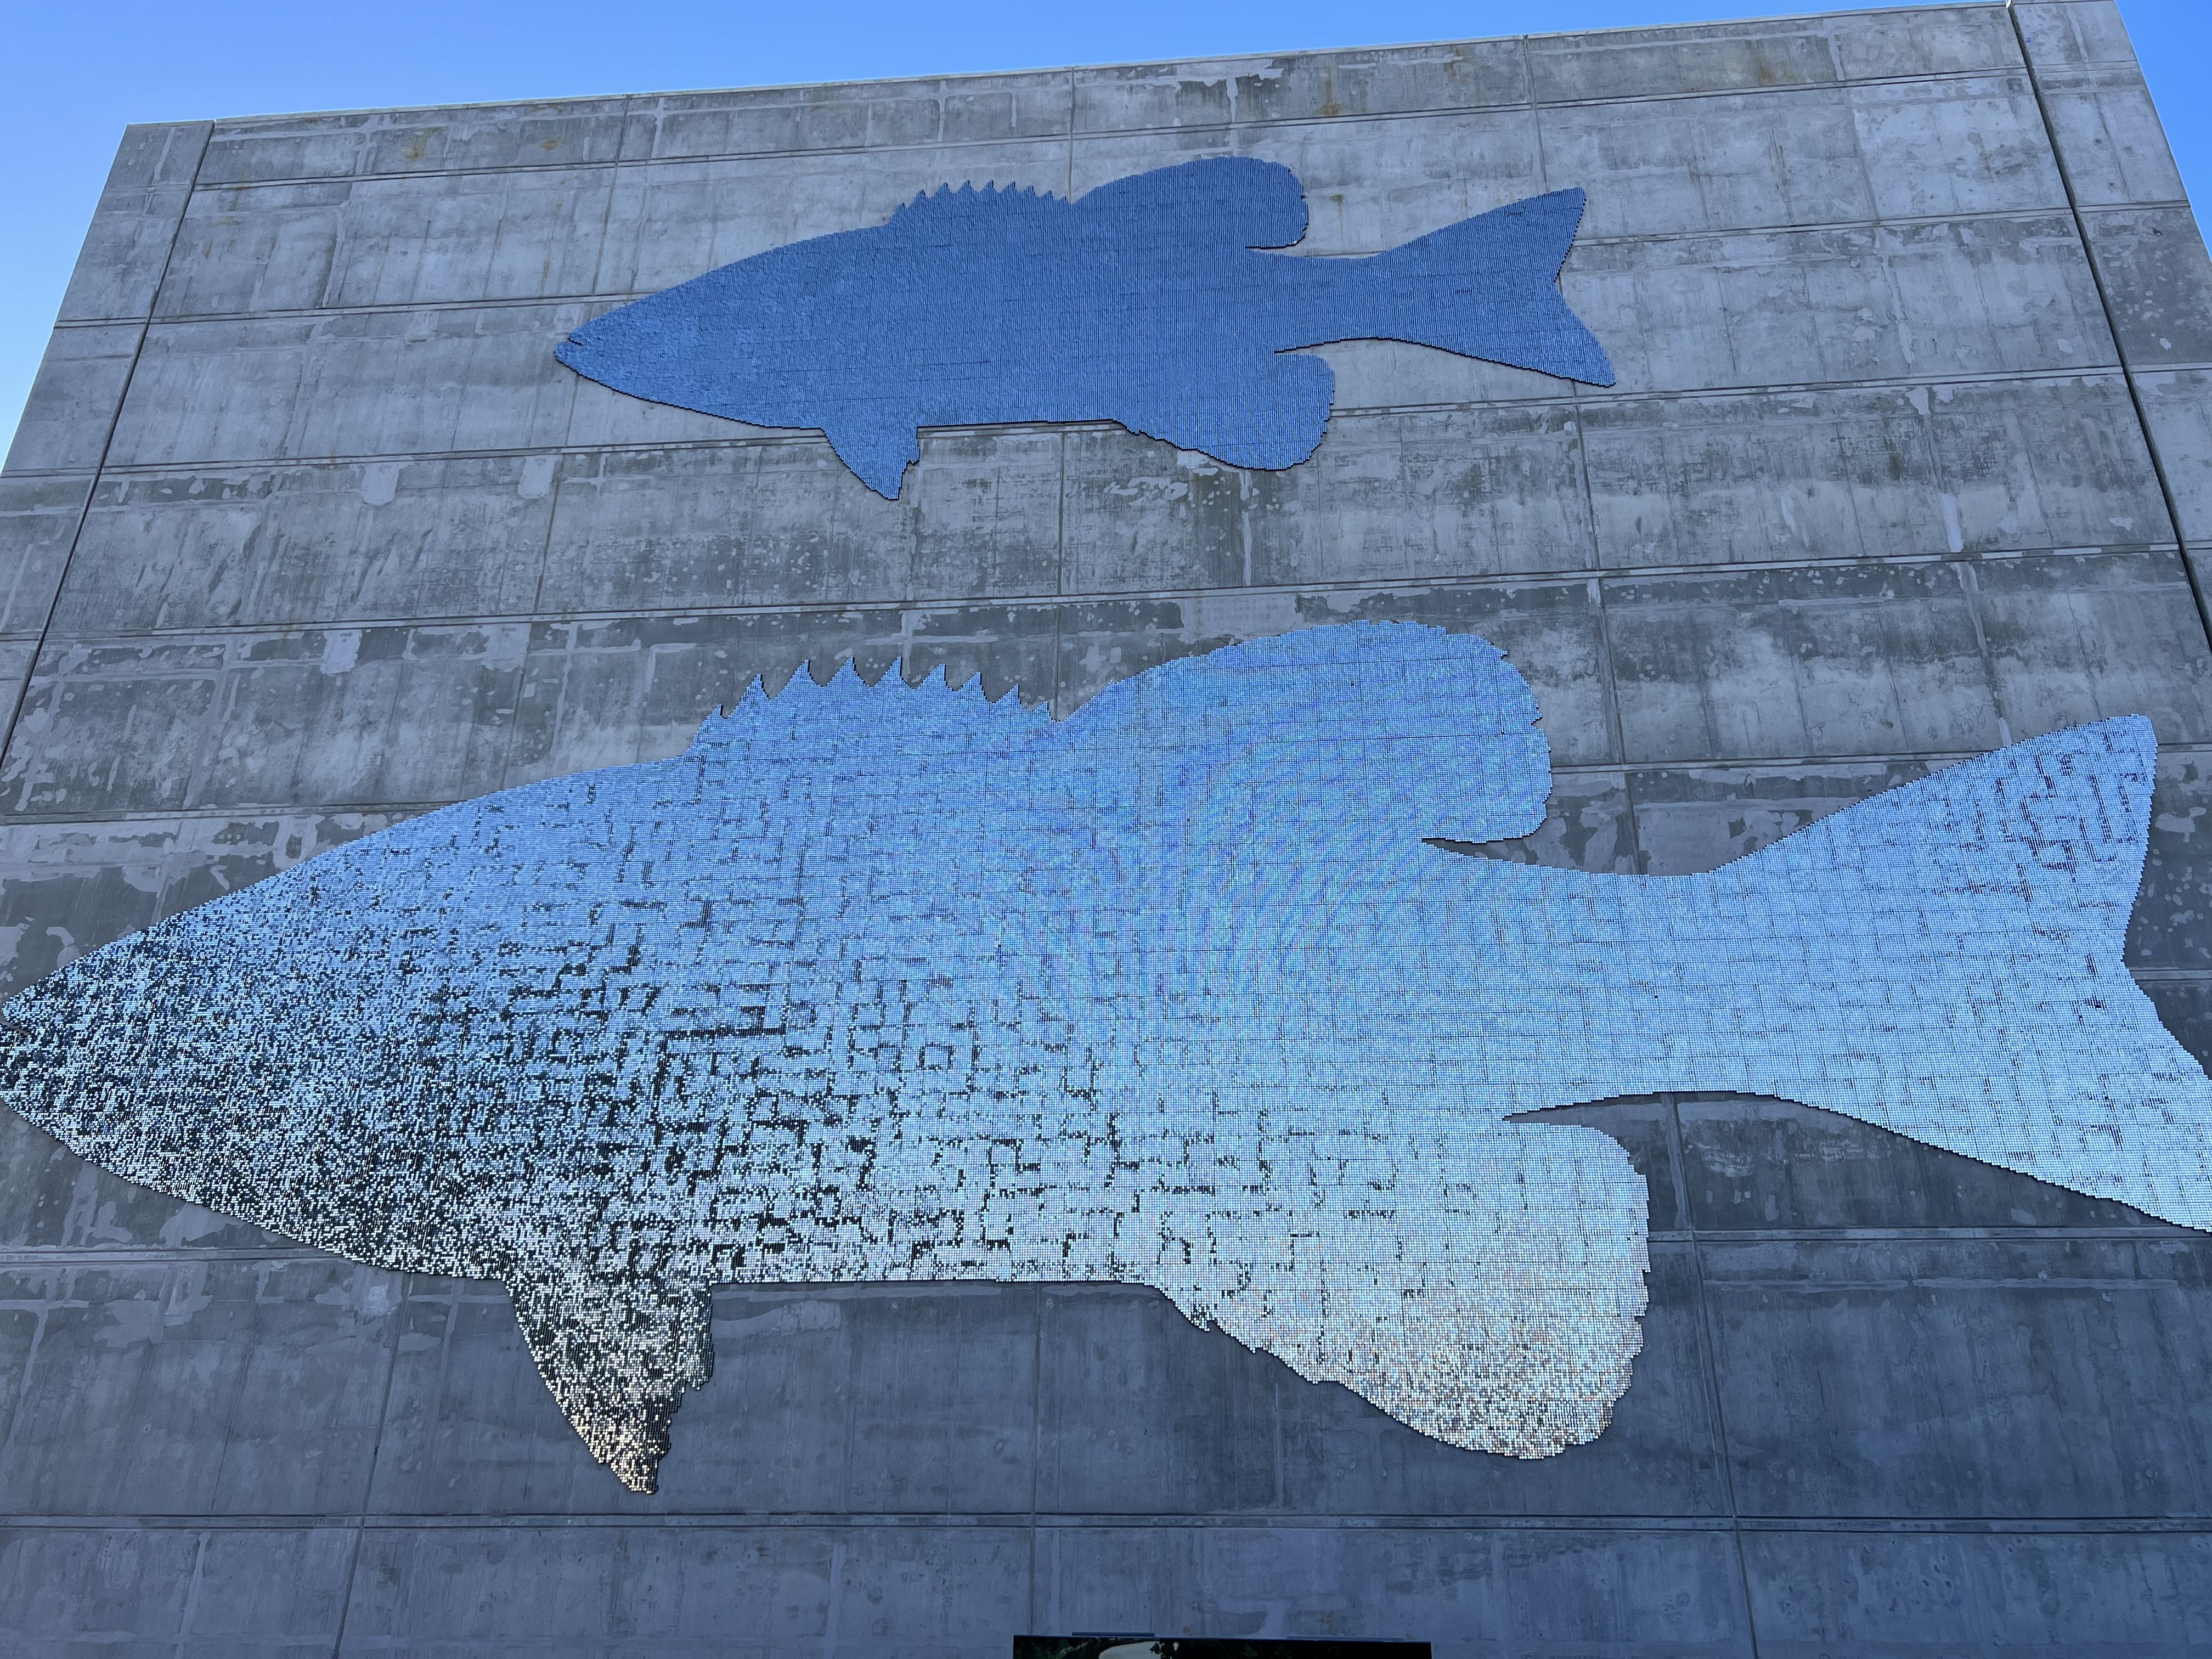 thousands of stainless steel disks arranged in teh shape of a fish, in an art installation in Bentonville, Arkansas